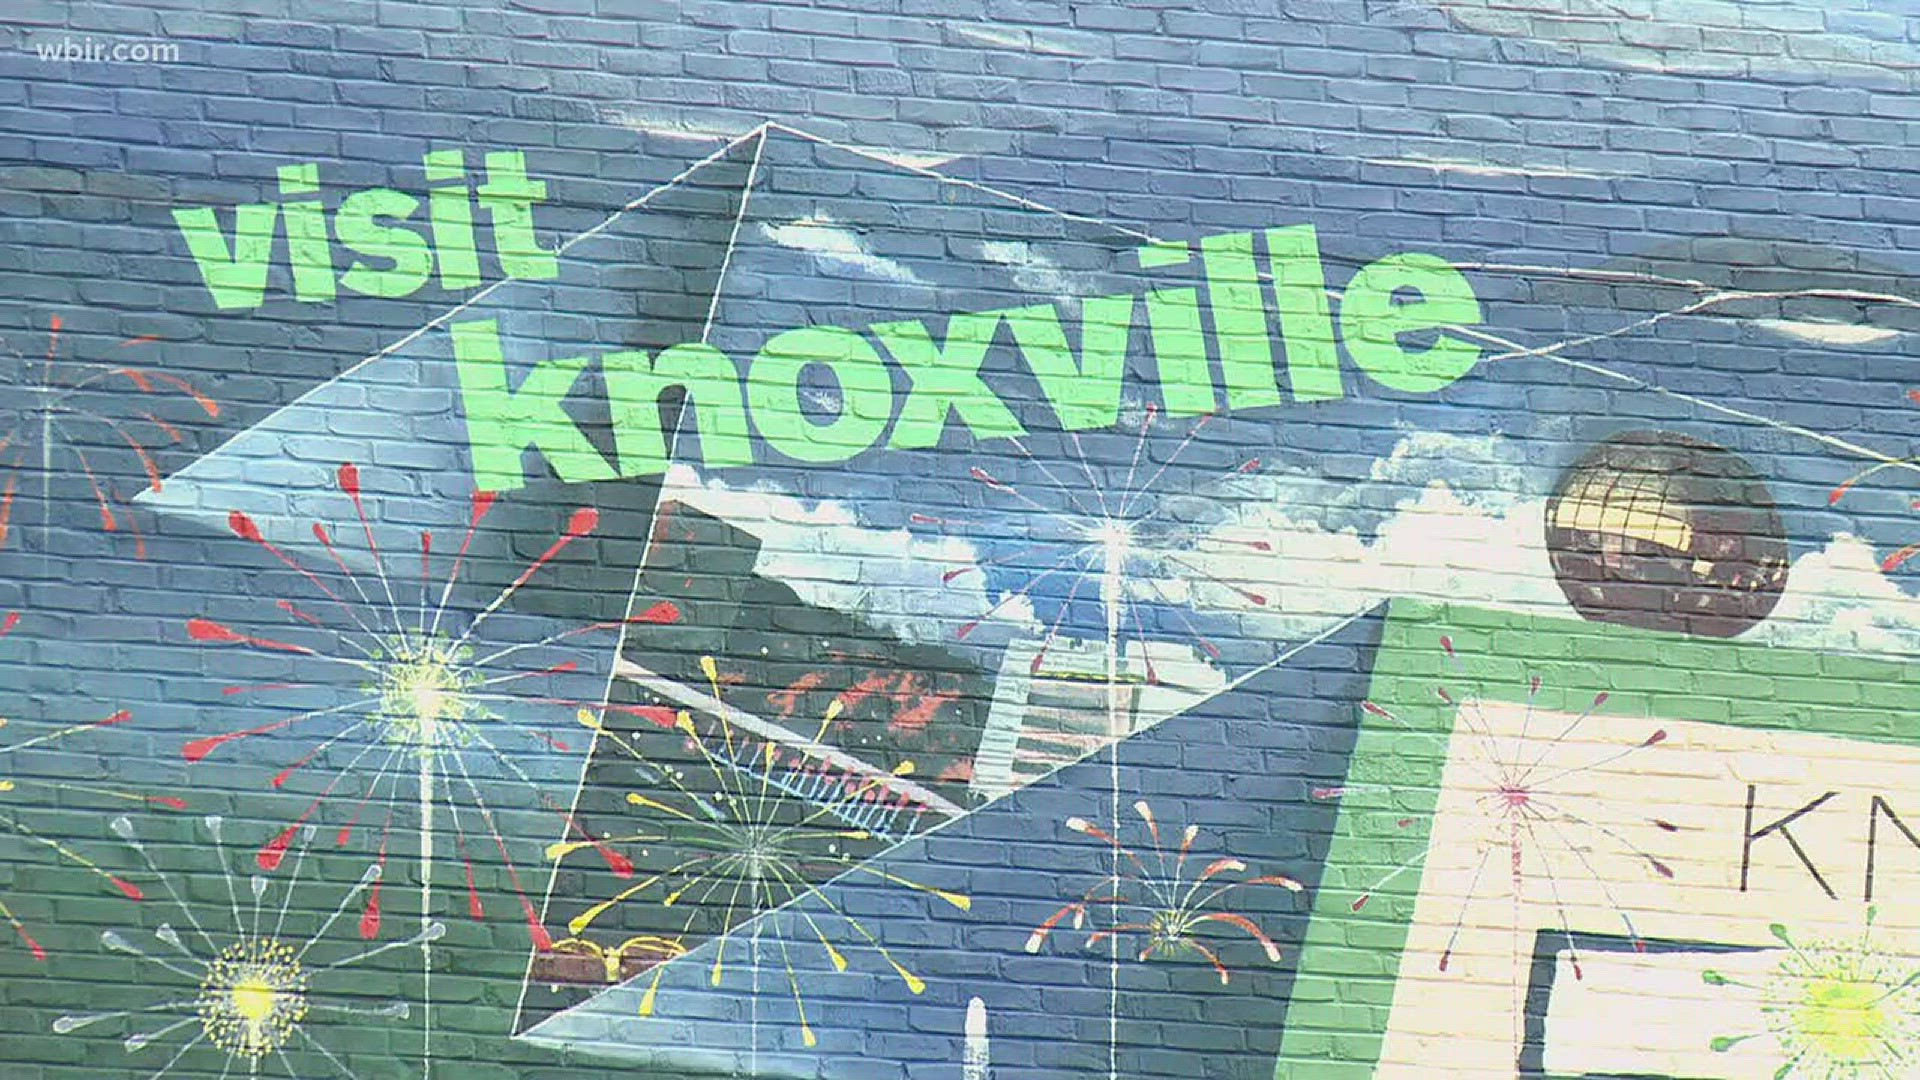 Nov. 1, 2017: Visit Knoxville celebrates five years of success that puts old controversies in the past. The organization was revamped in 2012 after a WBIR investigation revealed wasteful spending and exorbitant salaries.